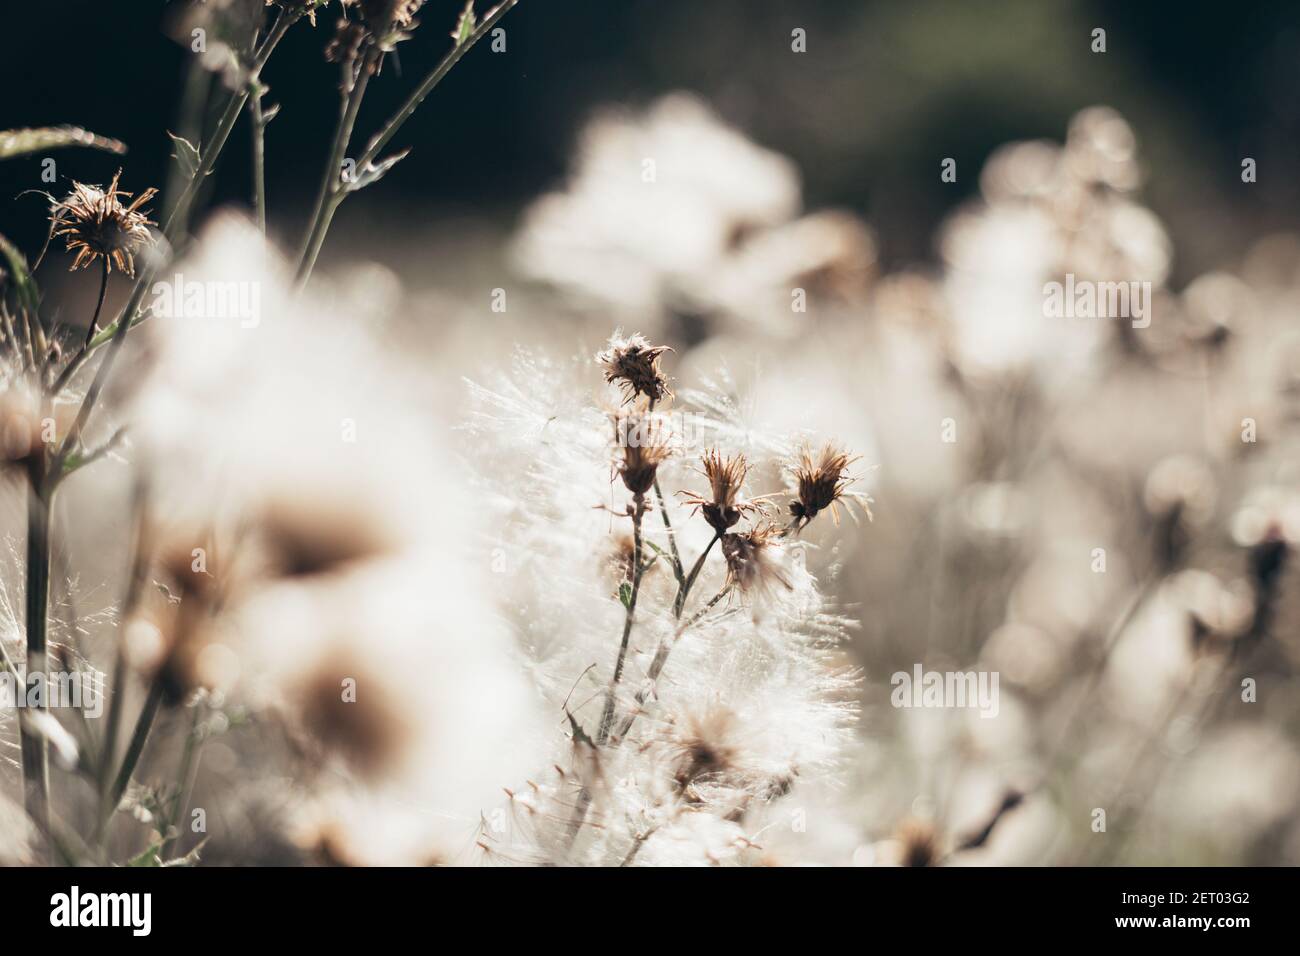 A selective focus of the red-seeded dandelions gleaming under the sunrays in the field Stock Photo